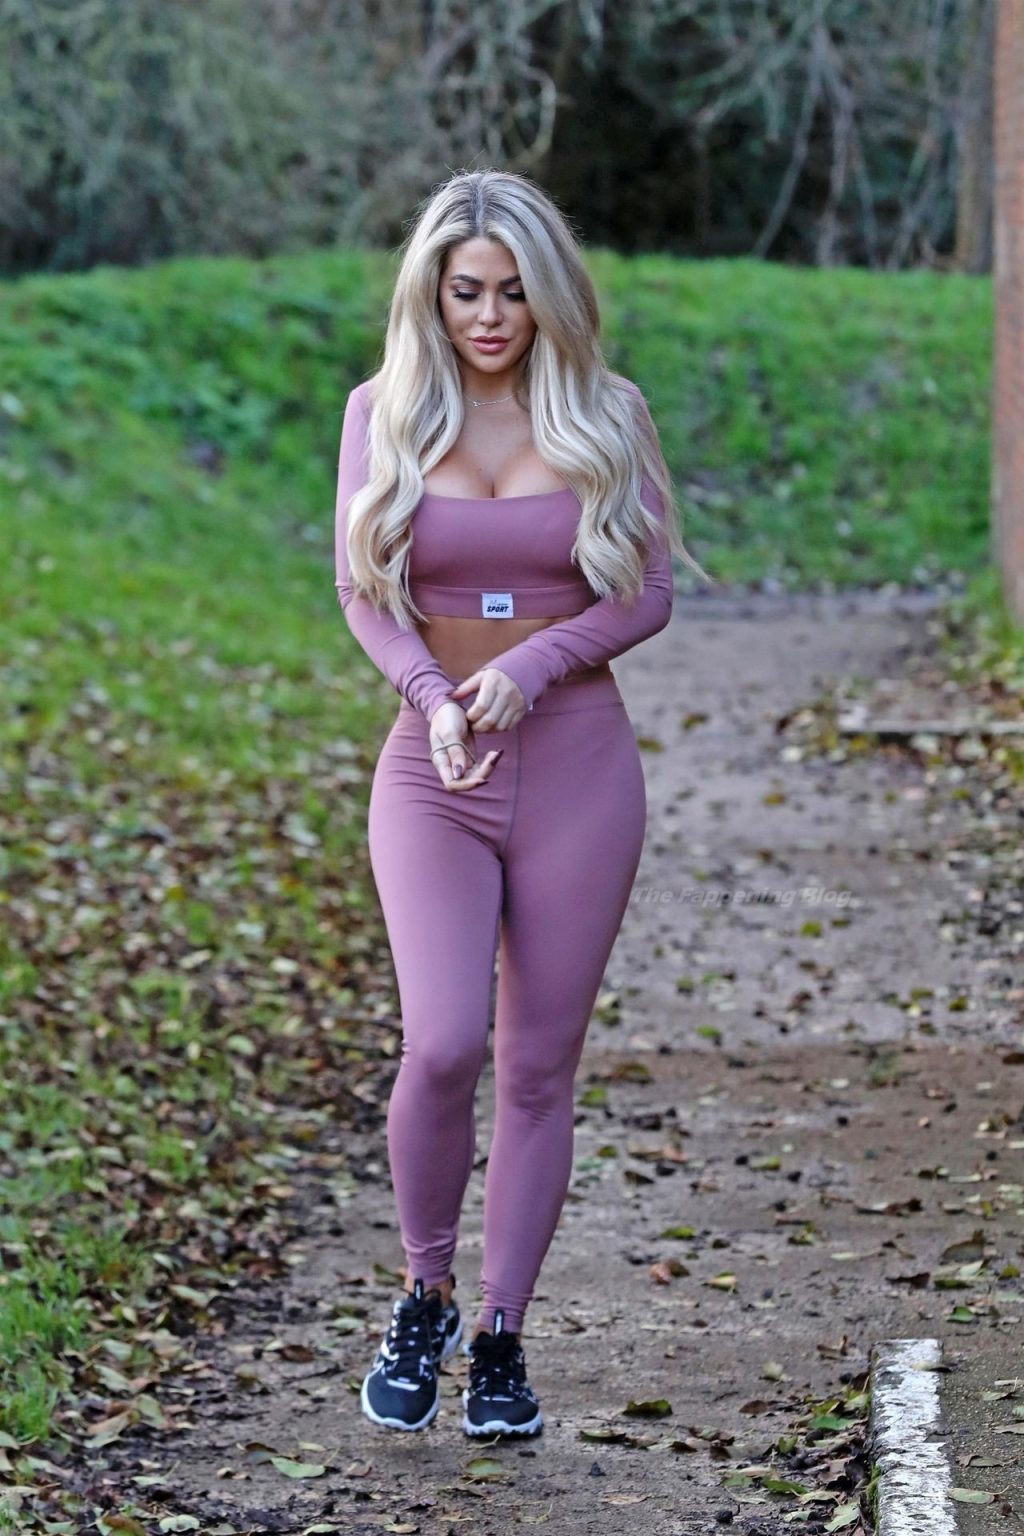 Bianca Gascoigne Displays Her Butt and New Boobs in Kent (9 Photos)